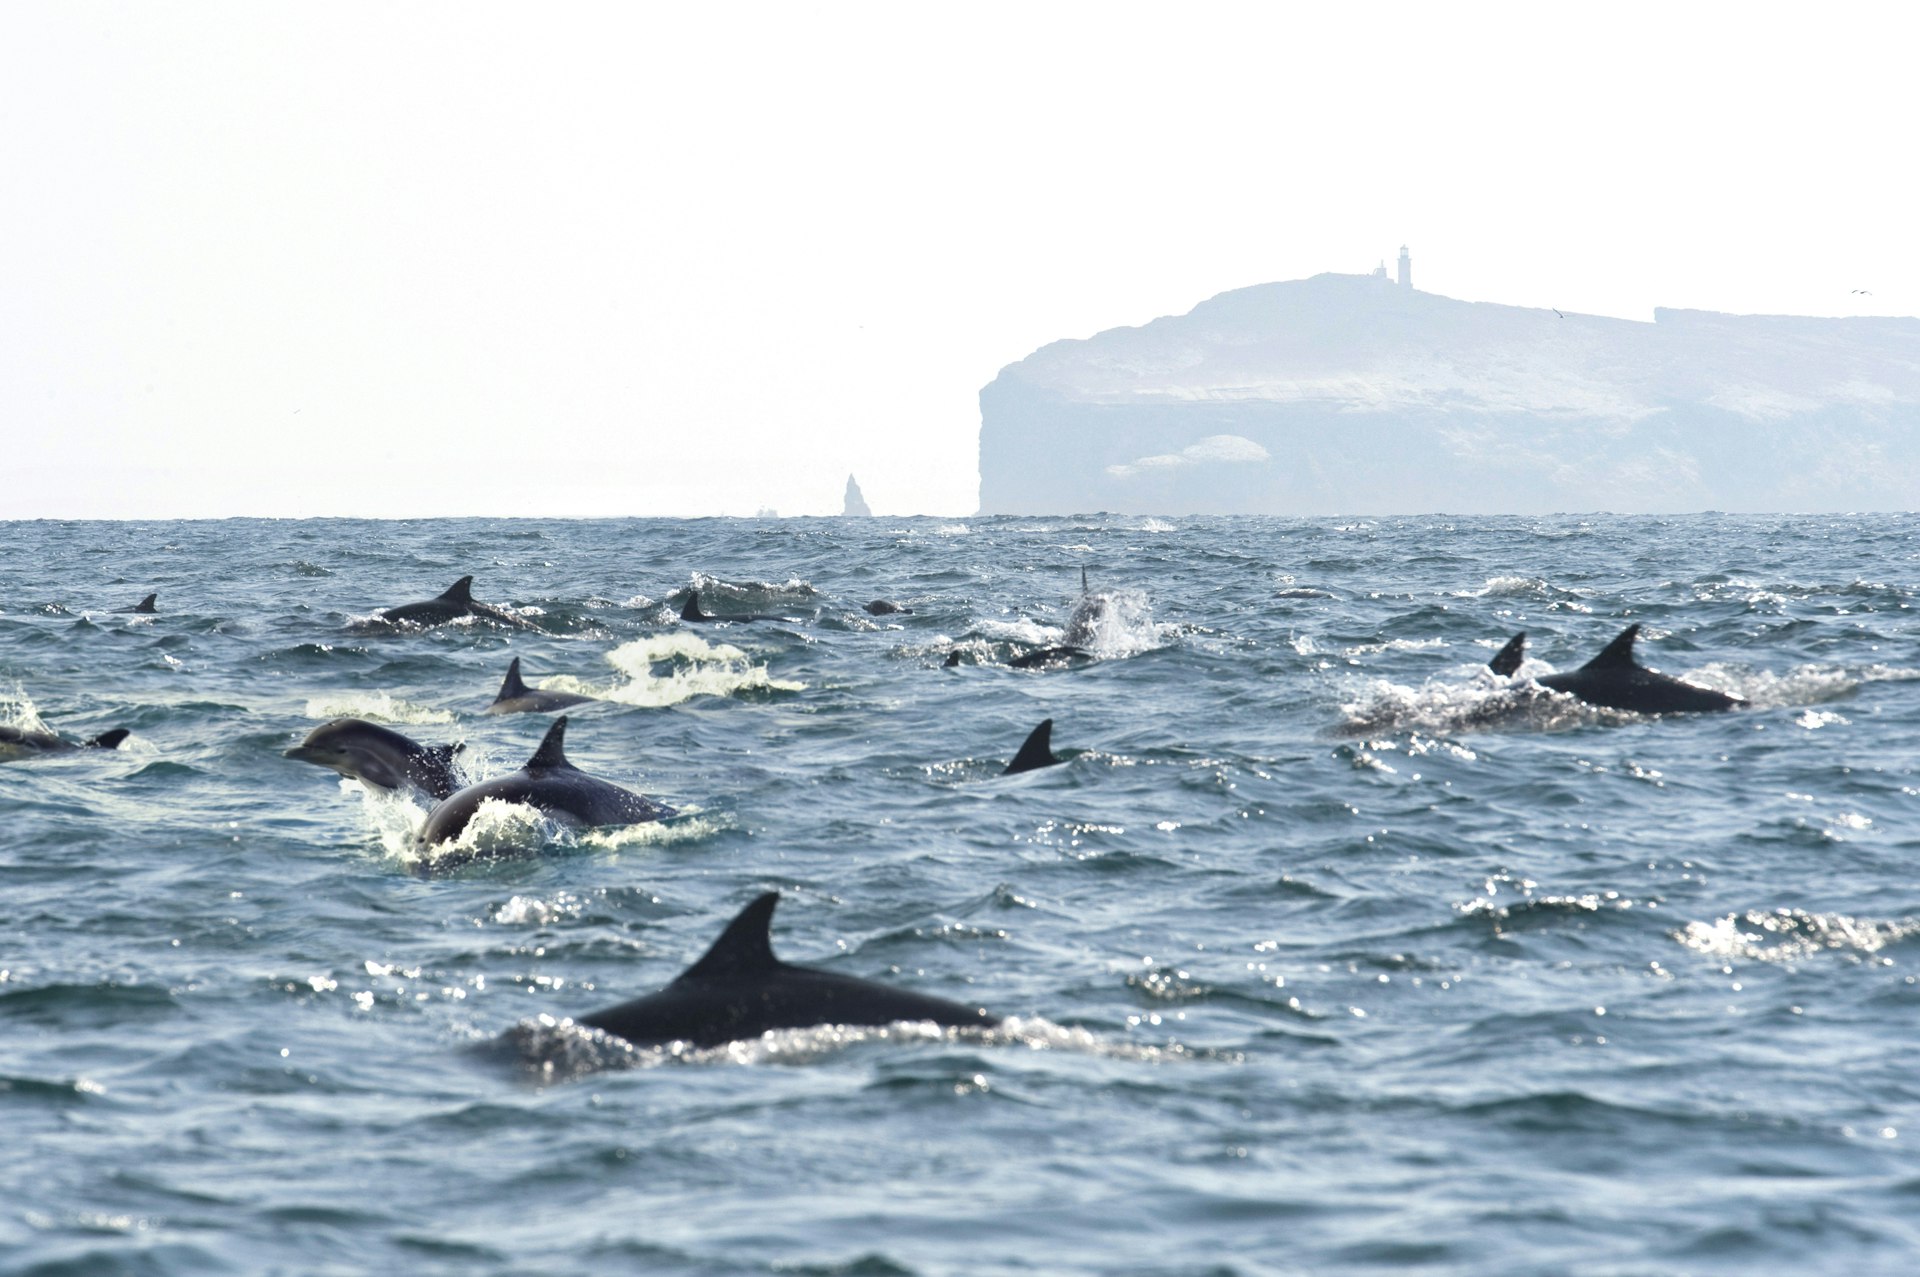 dolphins just off the coast of Channel Islands National Park